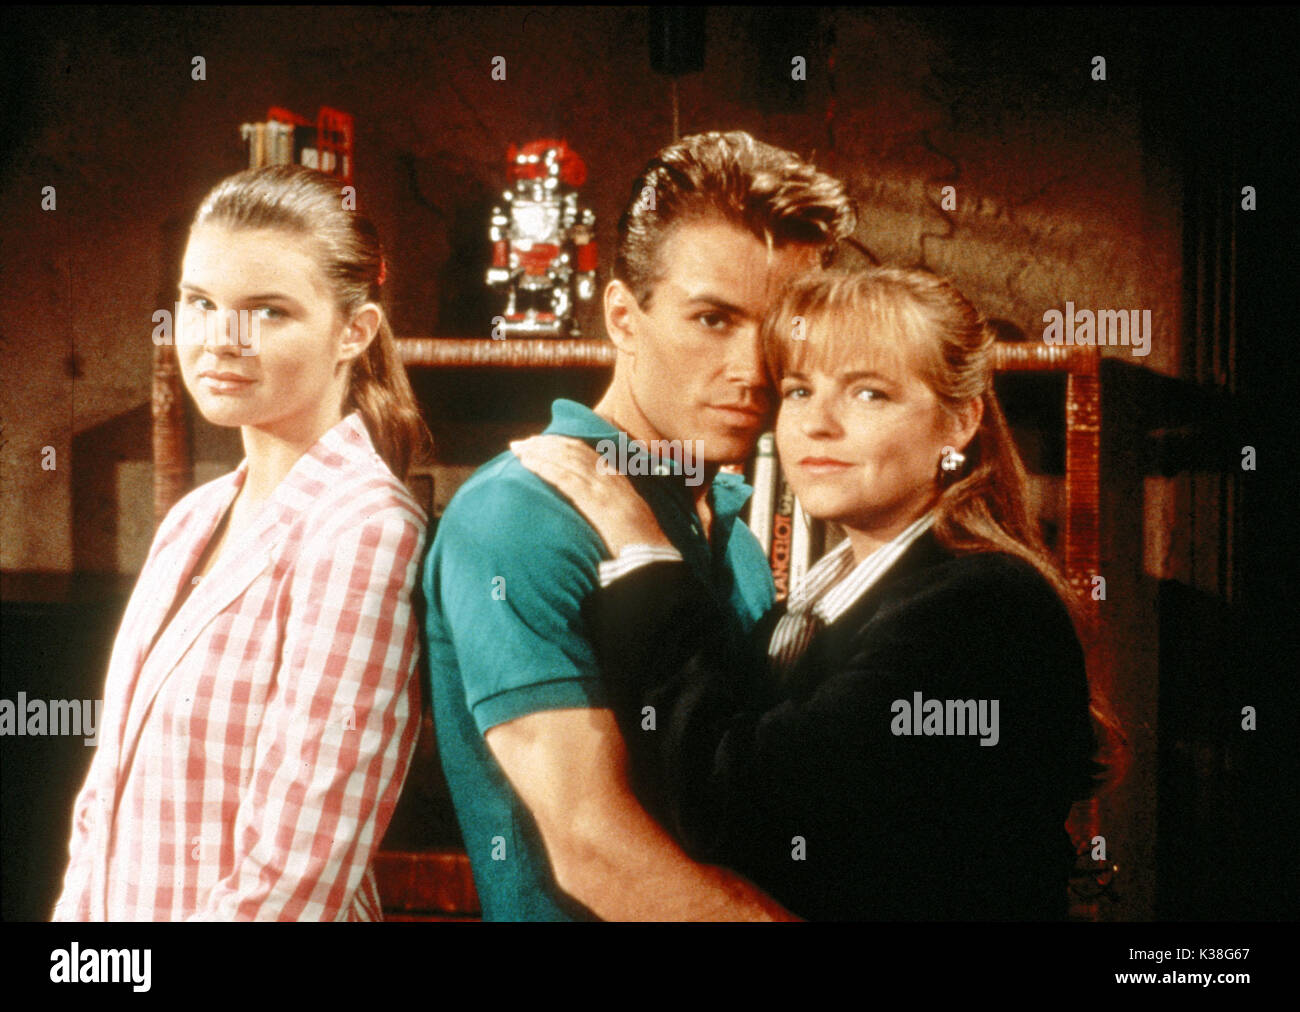 THE YOUNG AND THE RESTLESS US SOAP OPERA/CBS L to R HEATHER TOM, as Victoria Nicole Newman SCOTT REEVES, as Ryan McNeil (1991-2001) TRICIA CAST, as Nina Chanceller (1986-2001) CBS ENTERTAINMENT PRODUCTION THE YOUNG AND THE RESTLESS Stock Photo